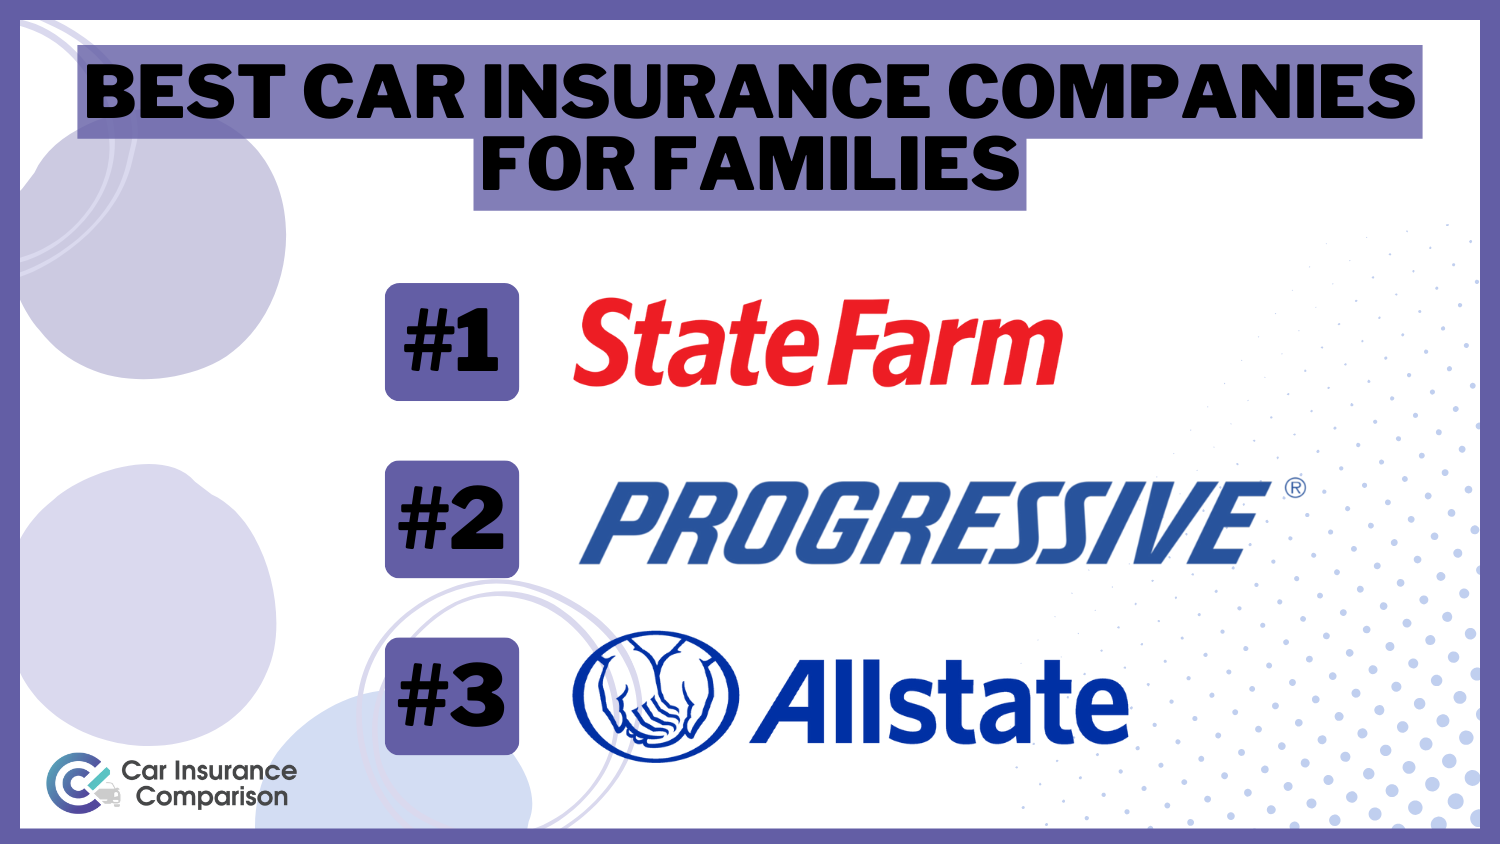 State Farm, Progressive, and Allstate: Best Car Insurance Companies for Families